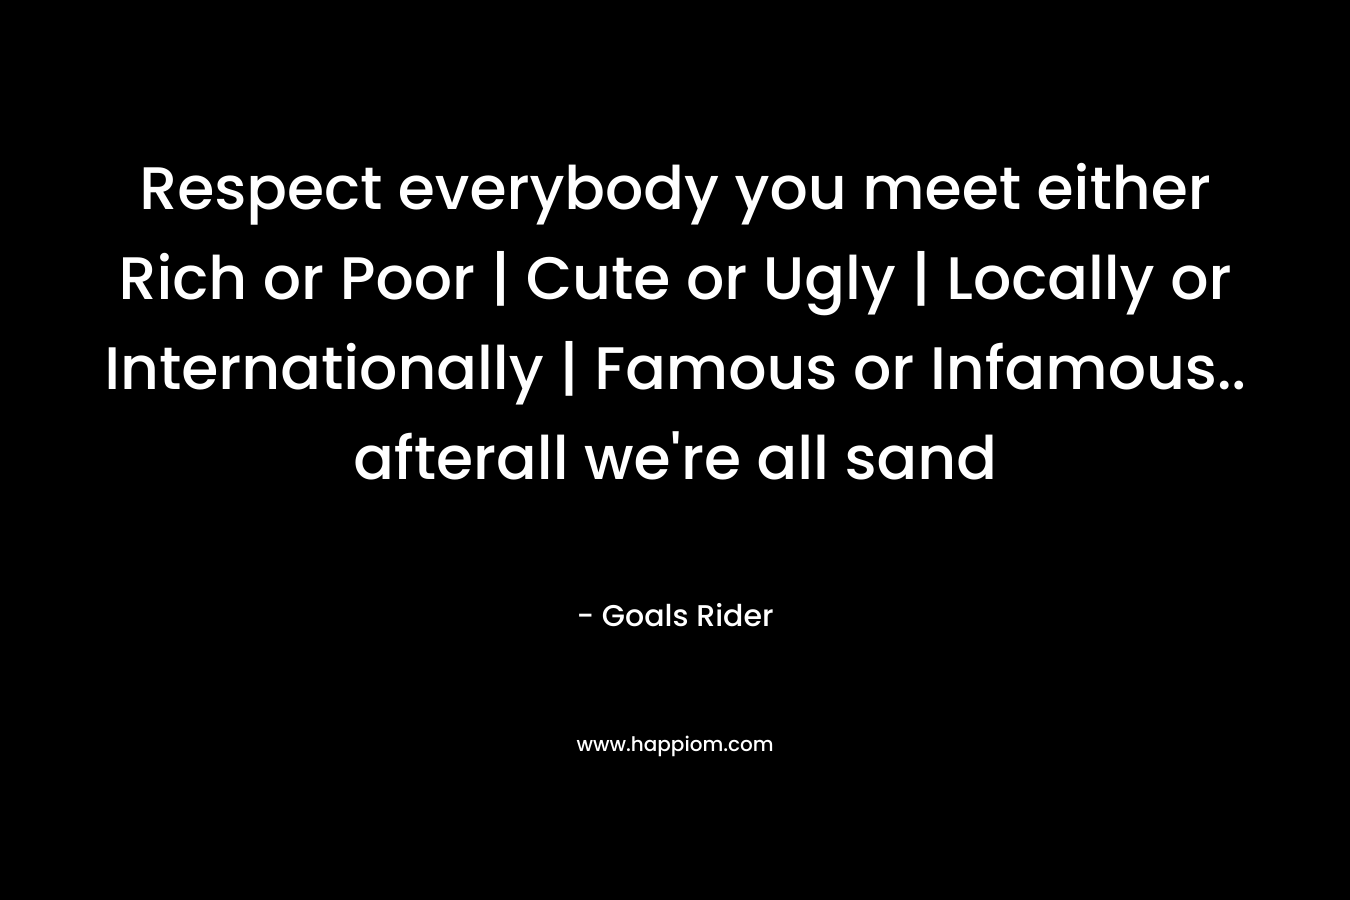 Respect everybody you meet either Rich or Poor | Cute or Ugly | Locally or Internationally | Famous or Infamous.. afterall we're all sand